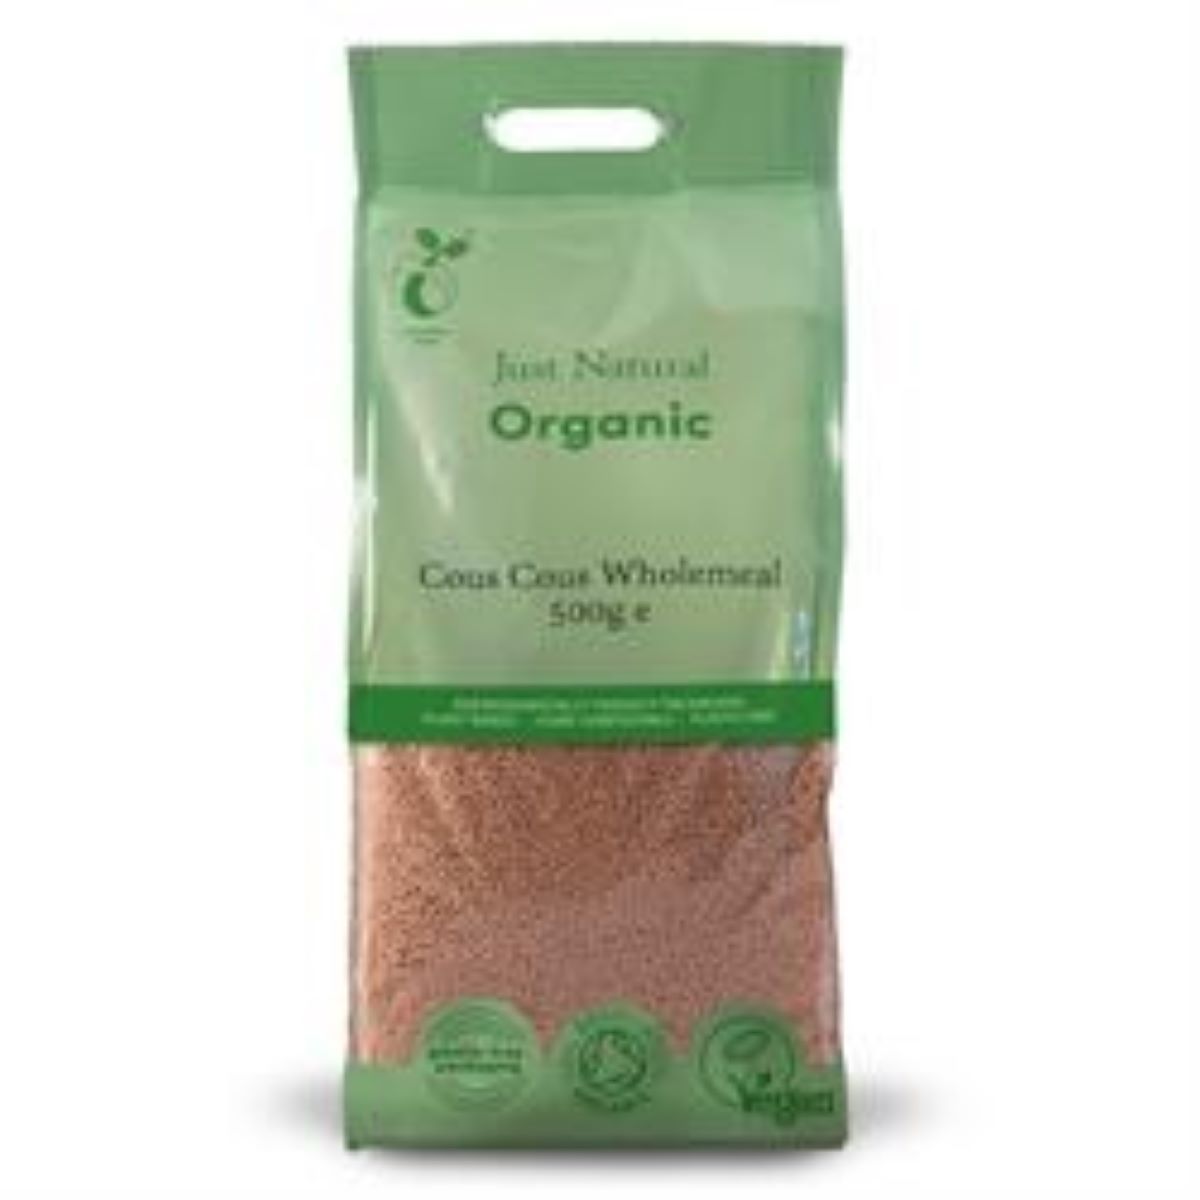 Just Natural Organic Wholemeal Cous Cous 500g